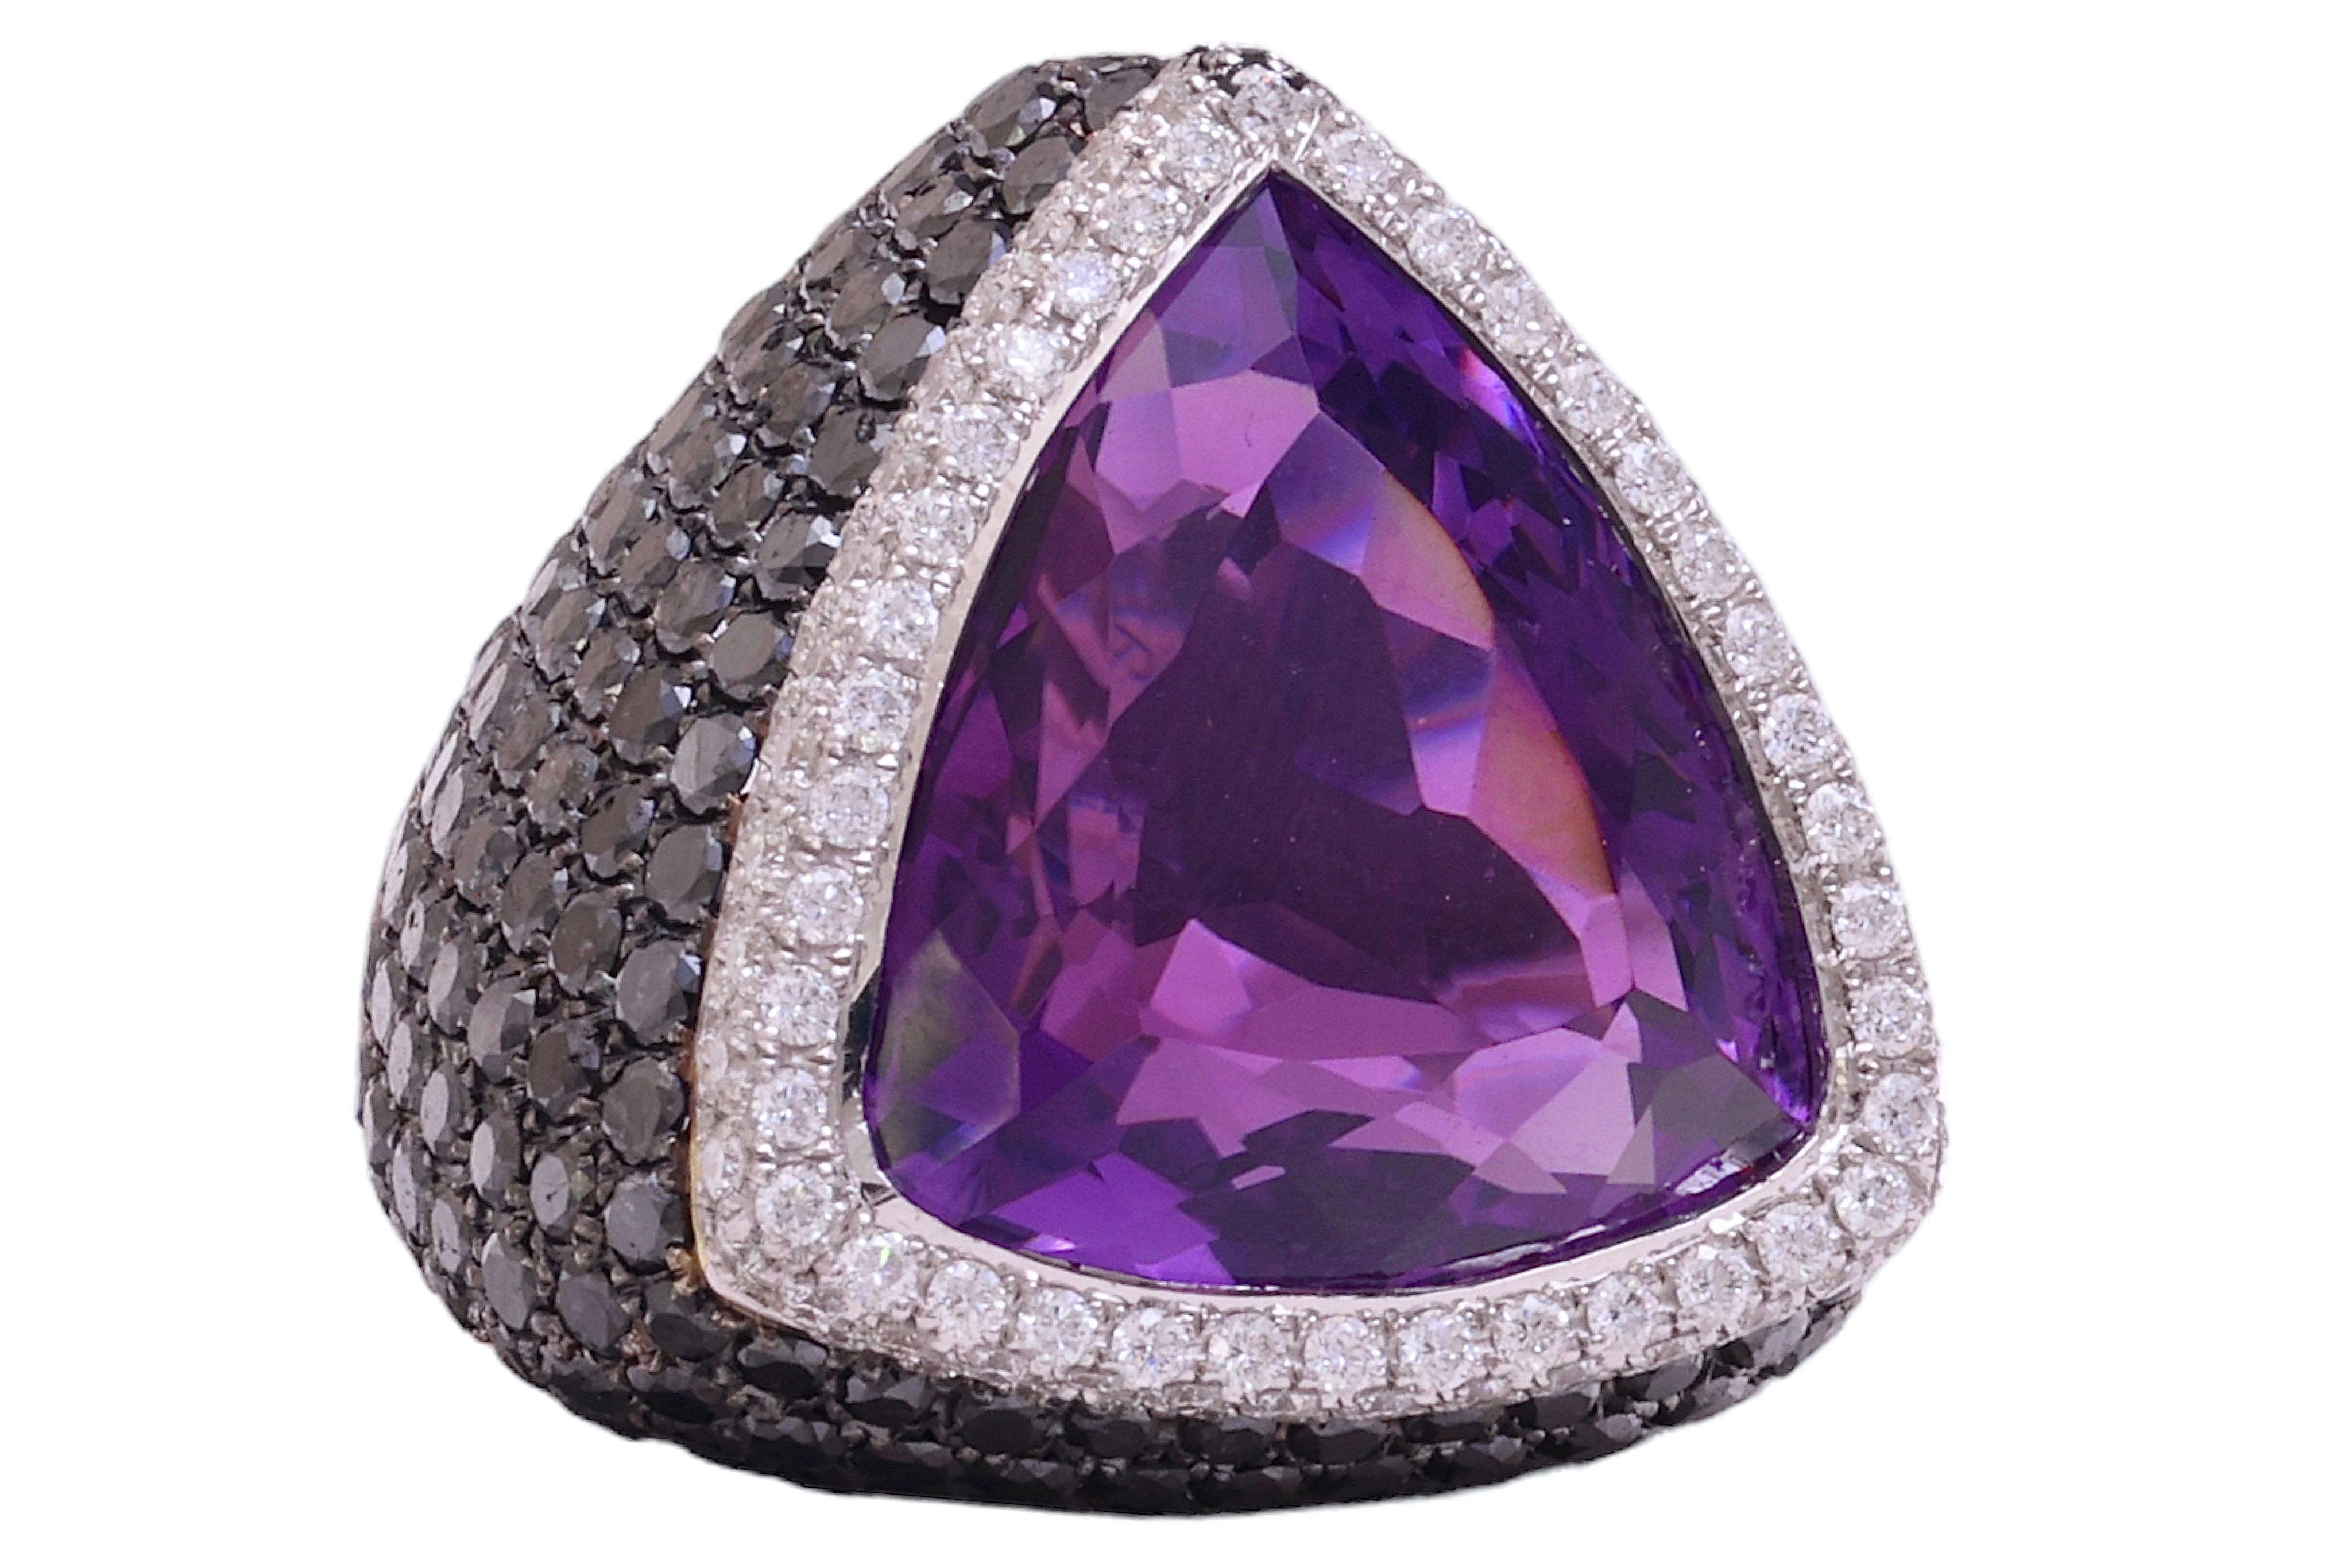 Gorgeous 18 kt. White Gold Ring With 27.25 ct. Amethyst and Black and White Diamonds together 11.33 ct.

Diamonds: White brilliant cut diamonds together  1.73 ct. , Black diamonds together 9.60 ct.

Gemstone: Amethyst 27.25 ct.

Material: 18 kt.